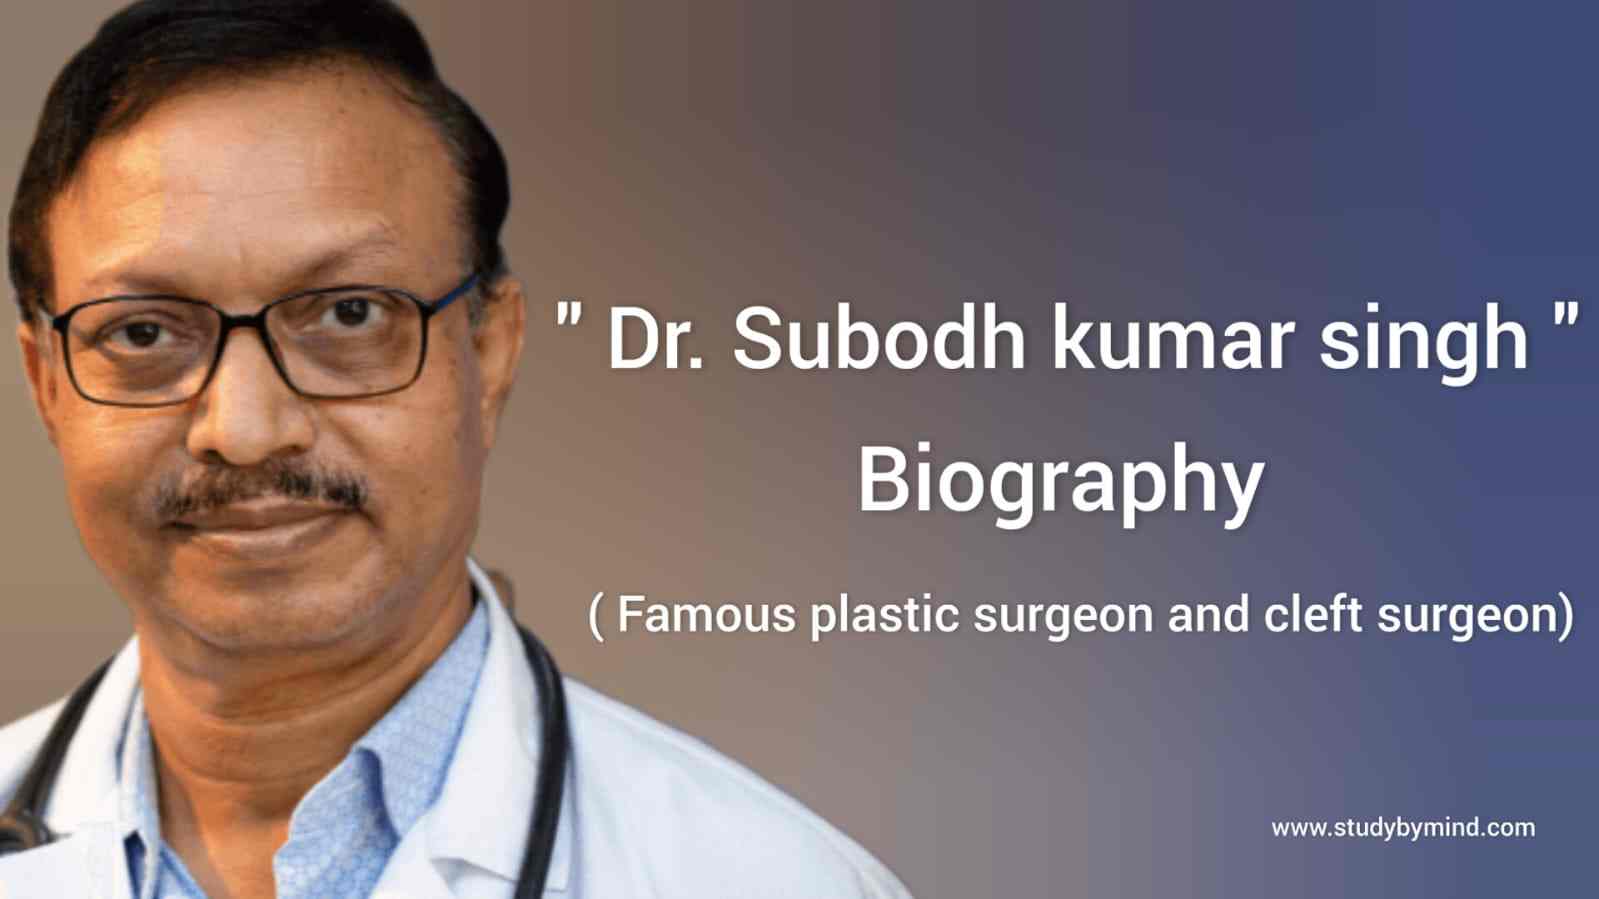 You are currently viewing Dr. Subodh kumar singh biography in english (famous plastic surgeon and cleft surgeon)